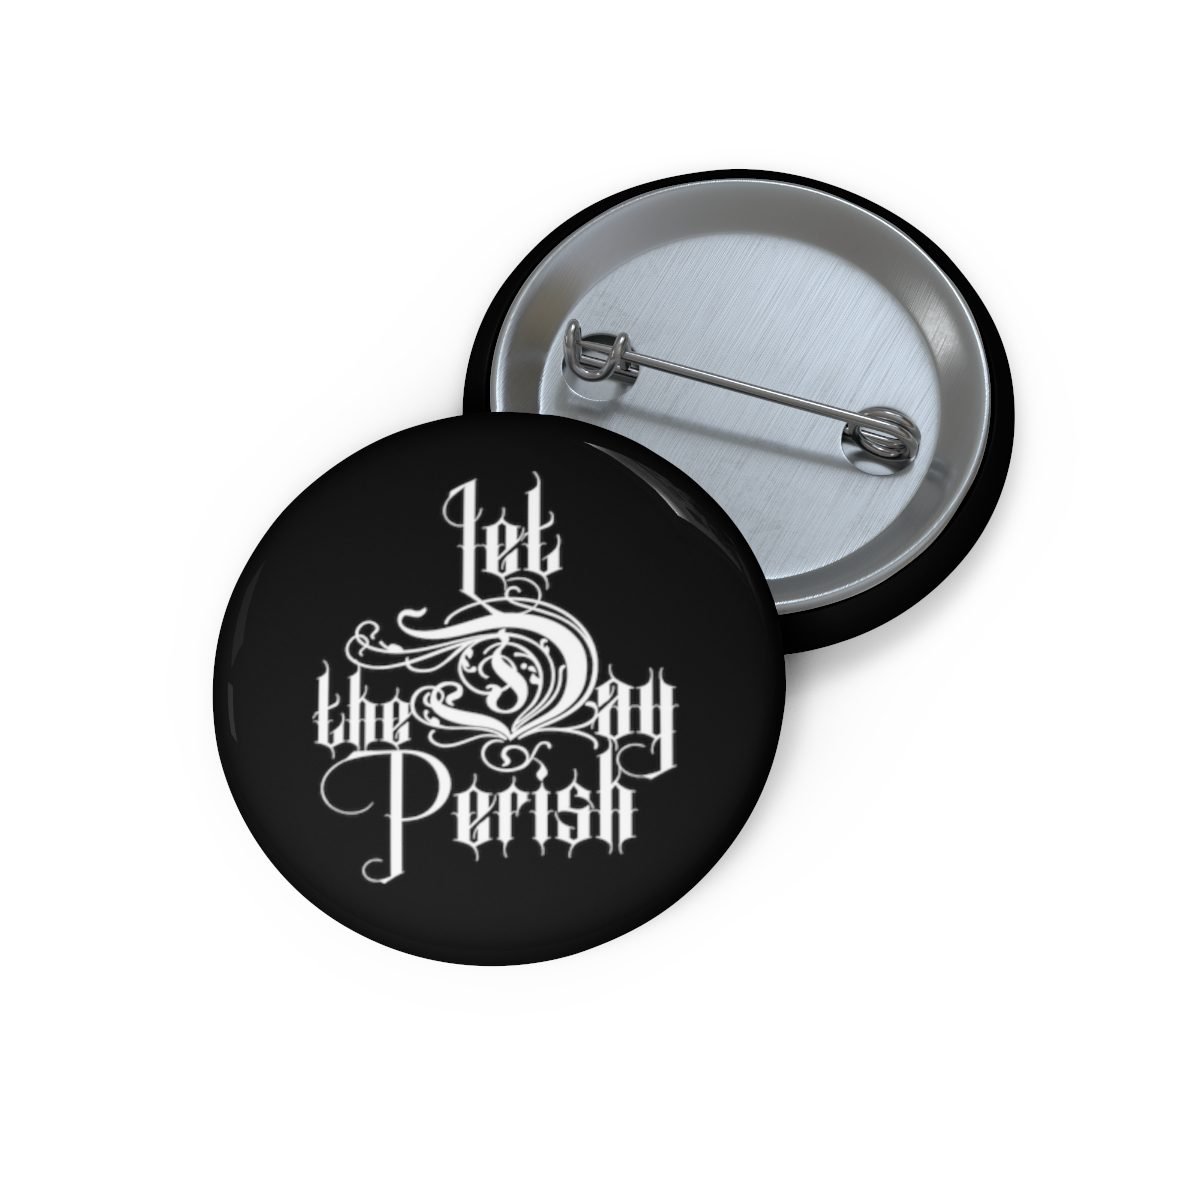 Let The Day Perish Logo Pin Buttons